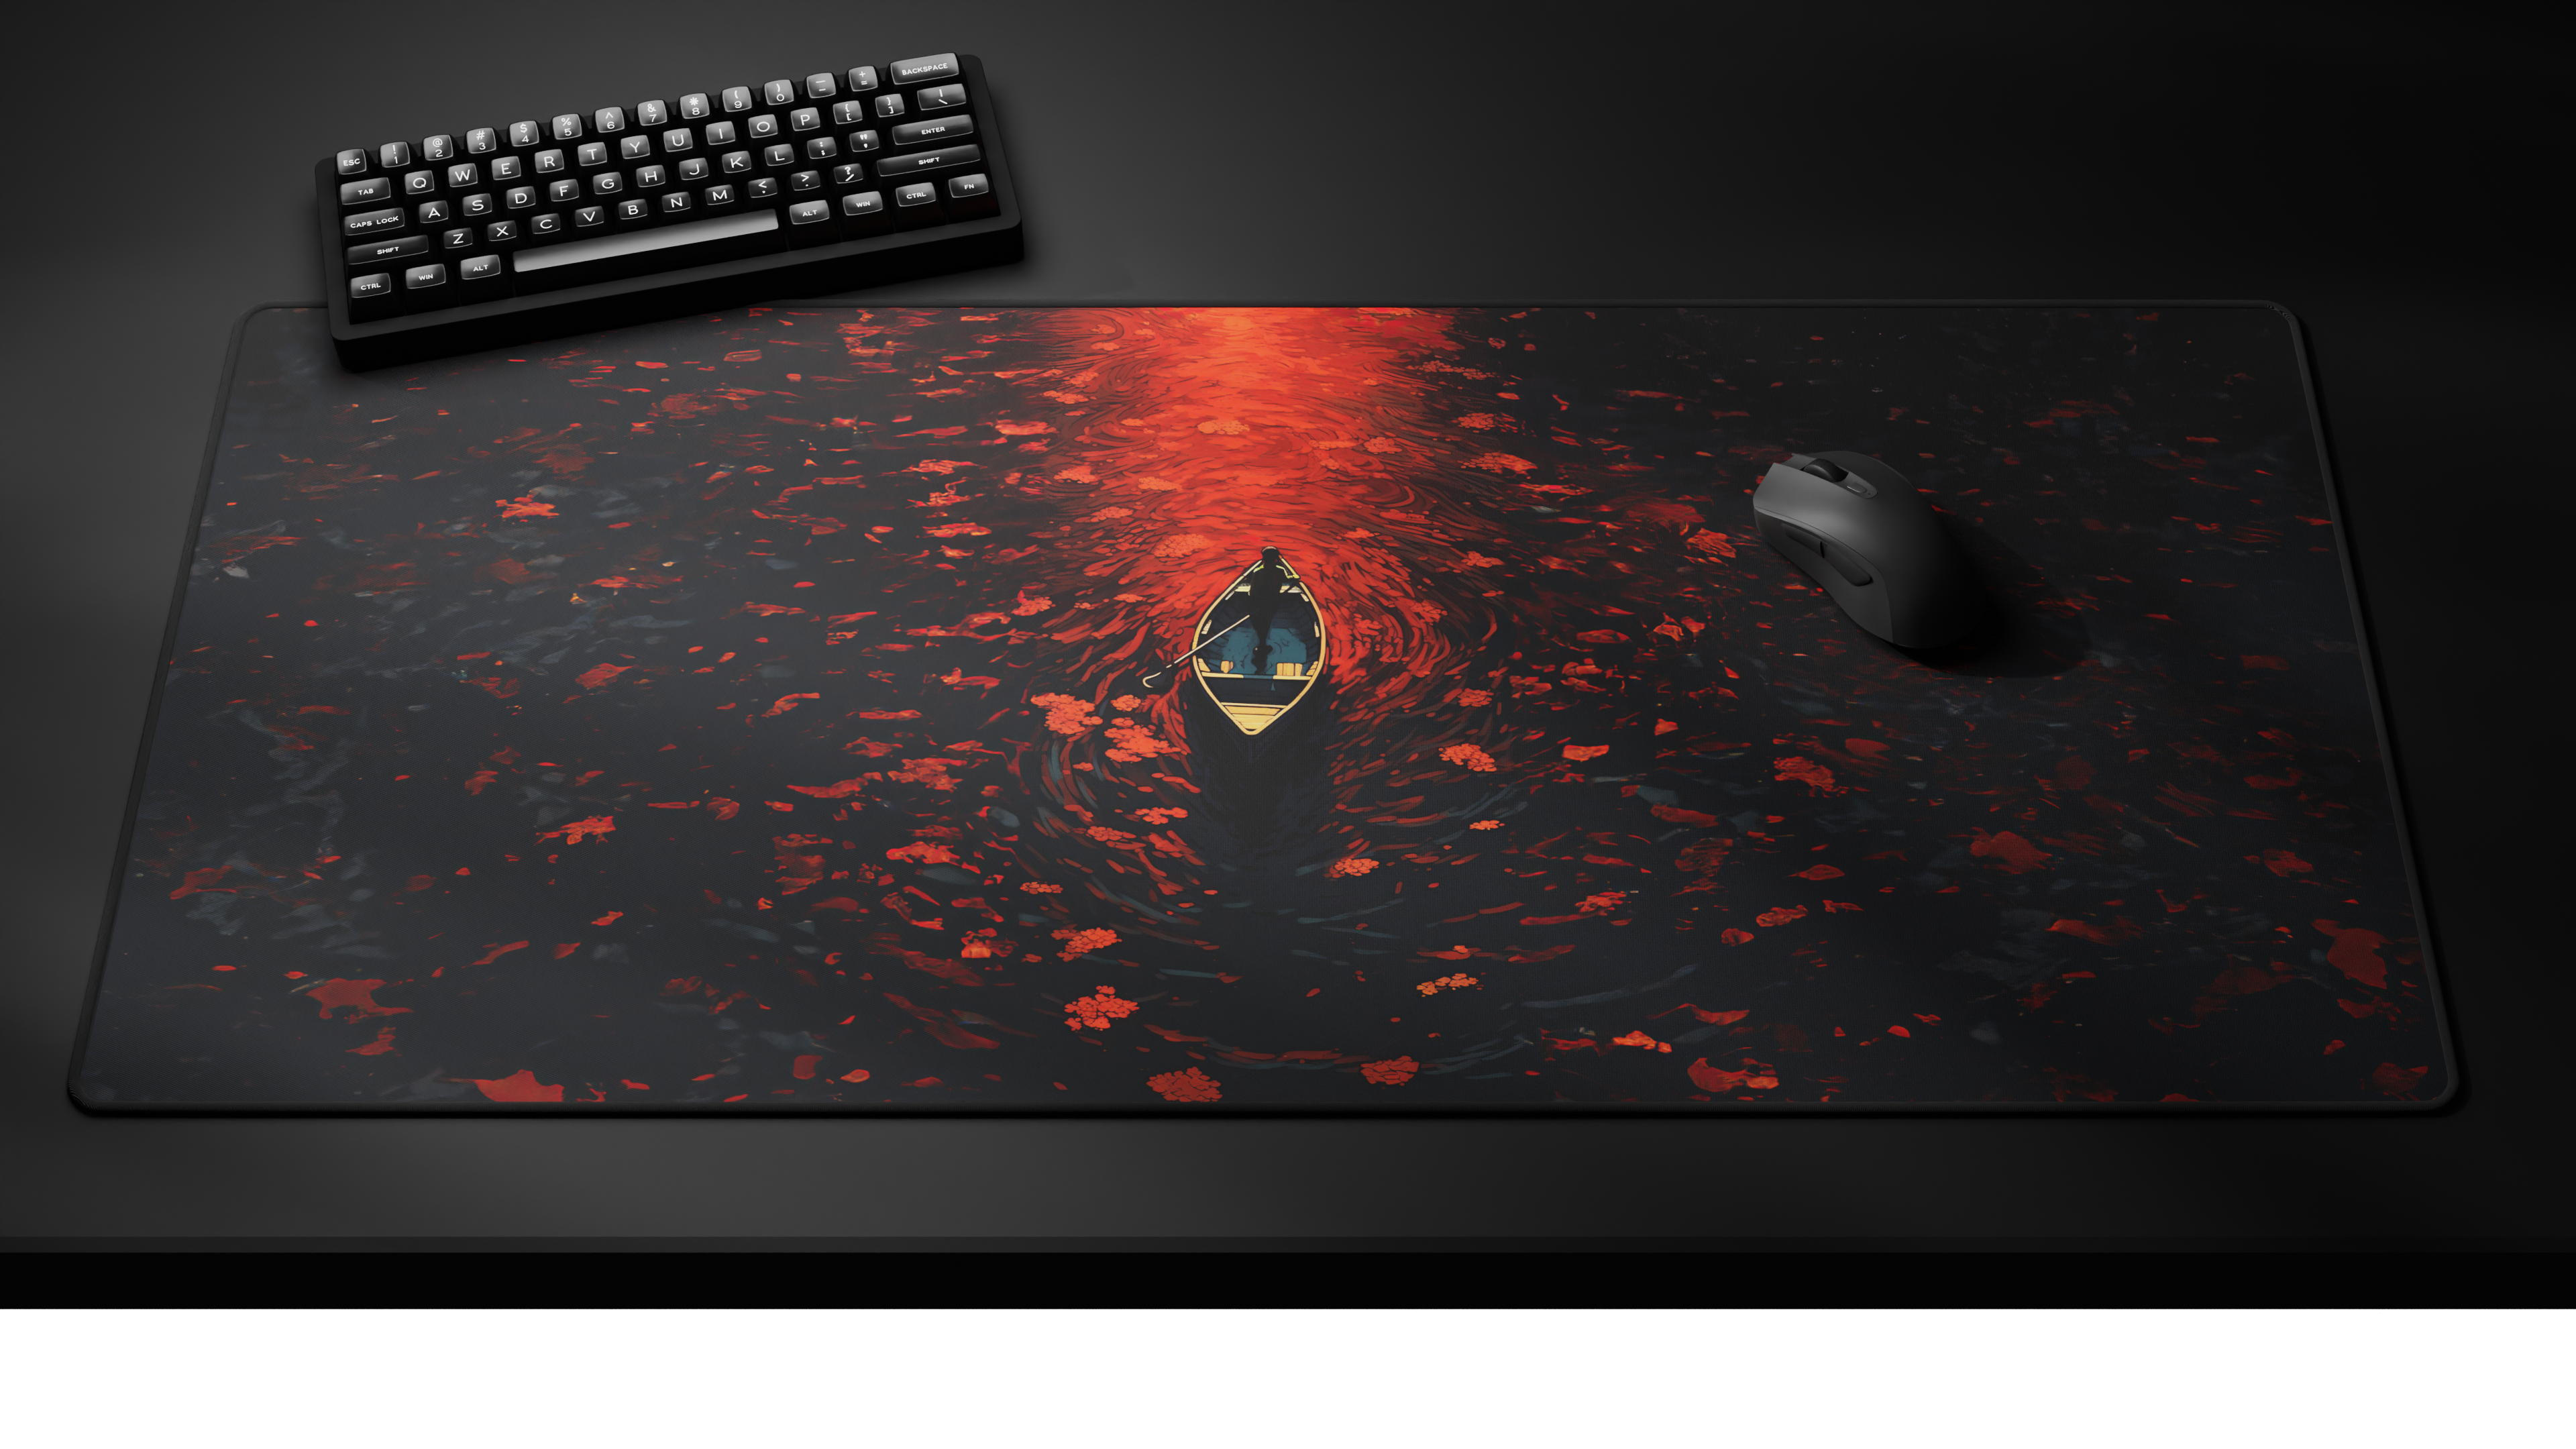 Deskmat 'Arcana Collection - Sea of Blood' by glutch